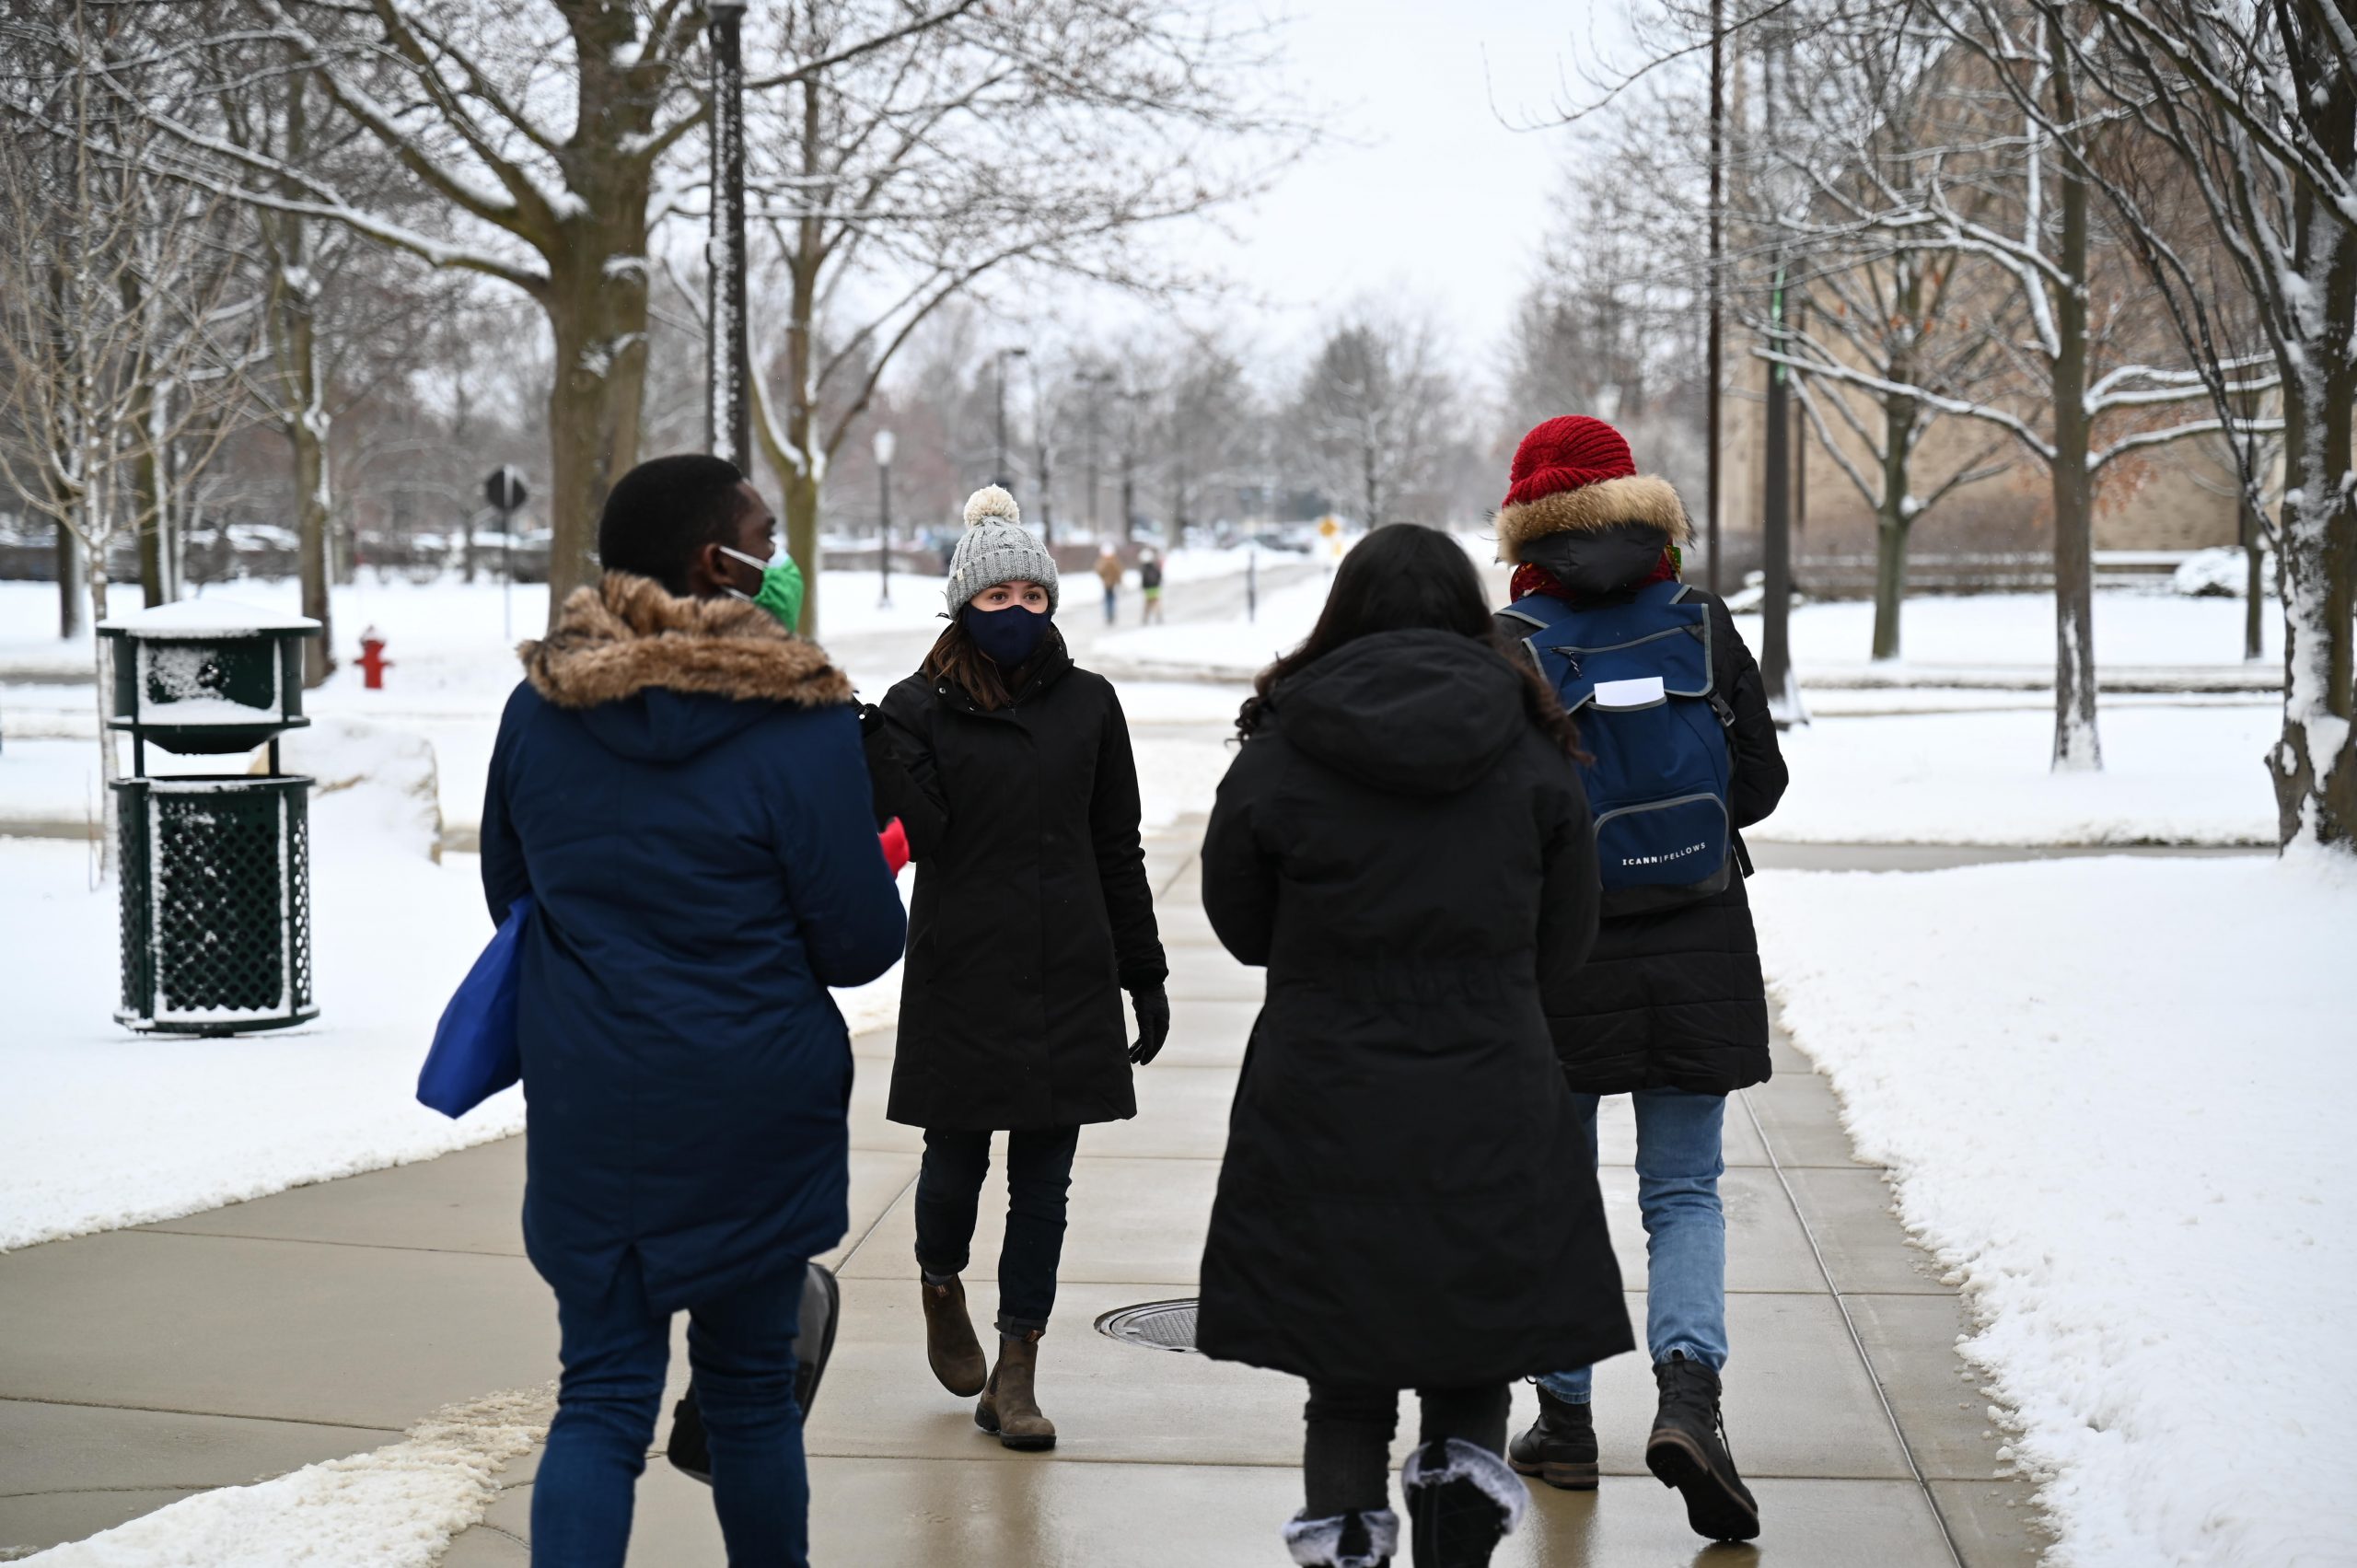 Students on a Notre Dame campus tour in the snow